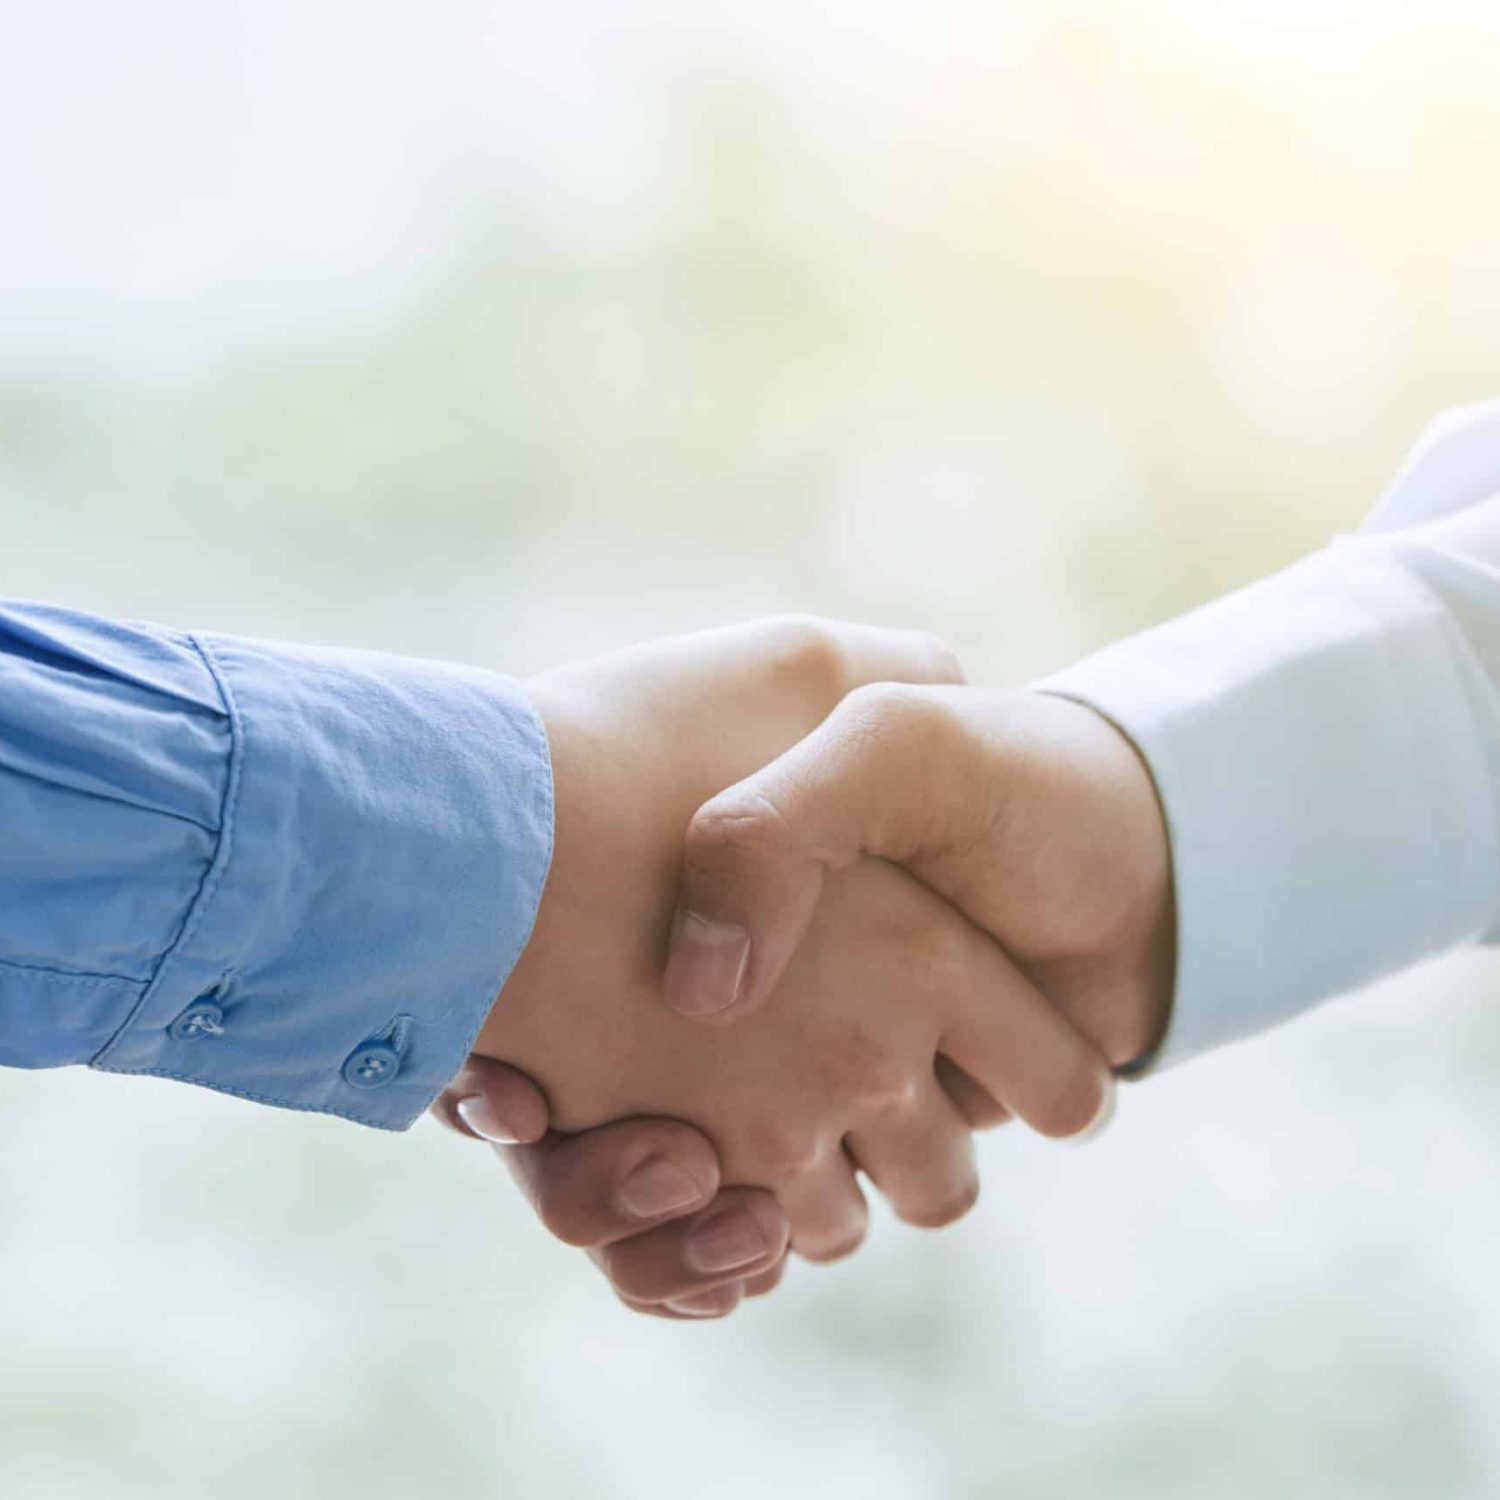 Business partners shaking hands to confirm the deal